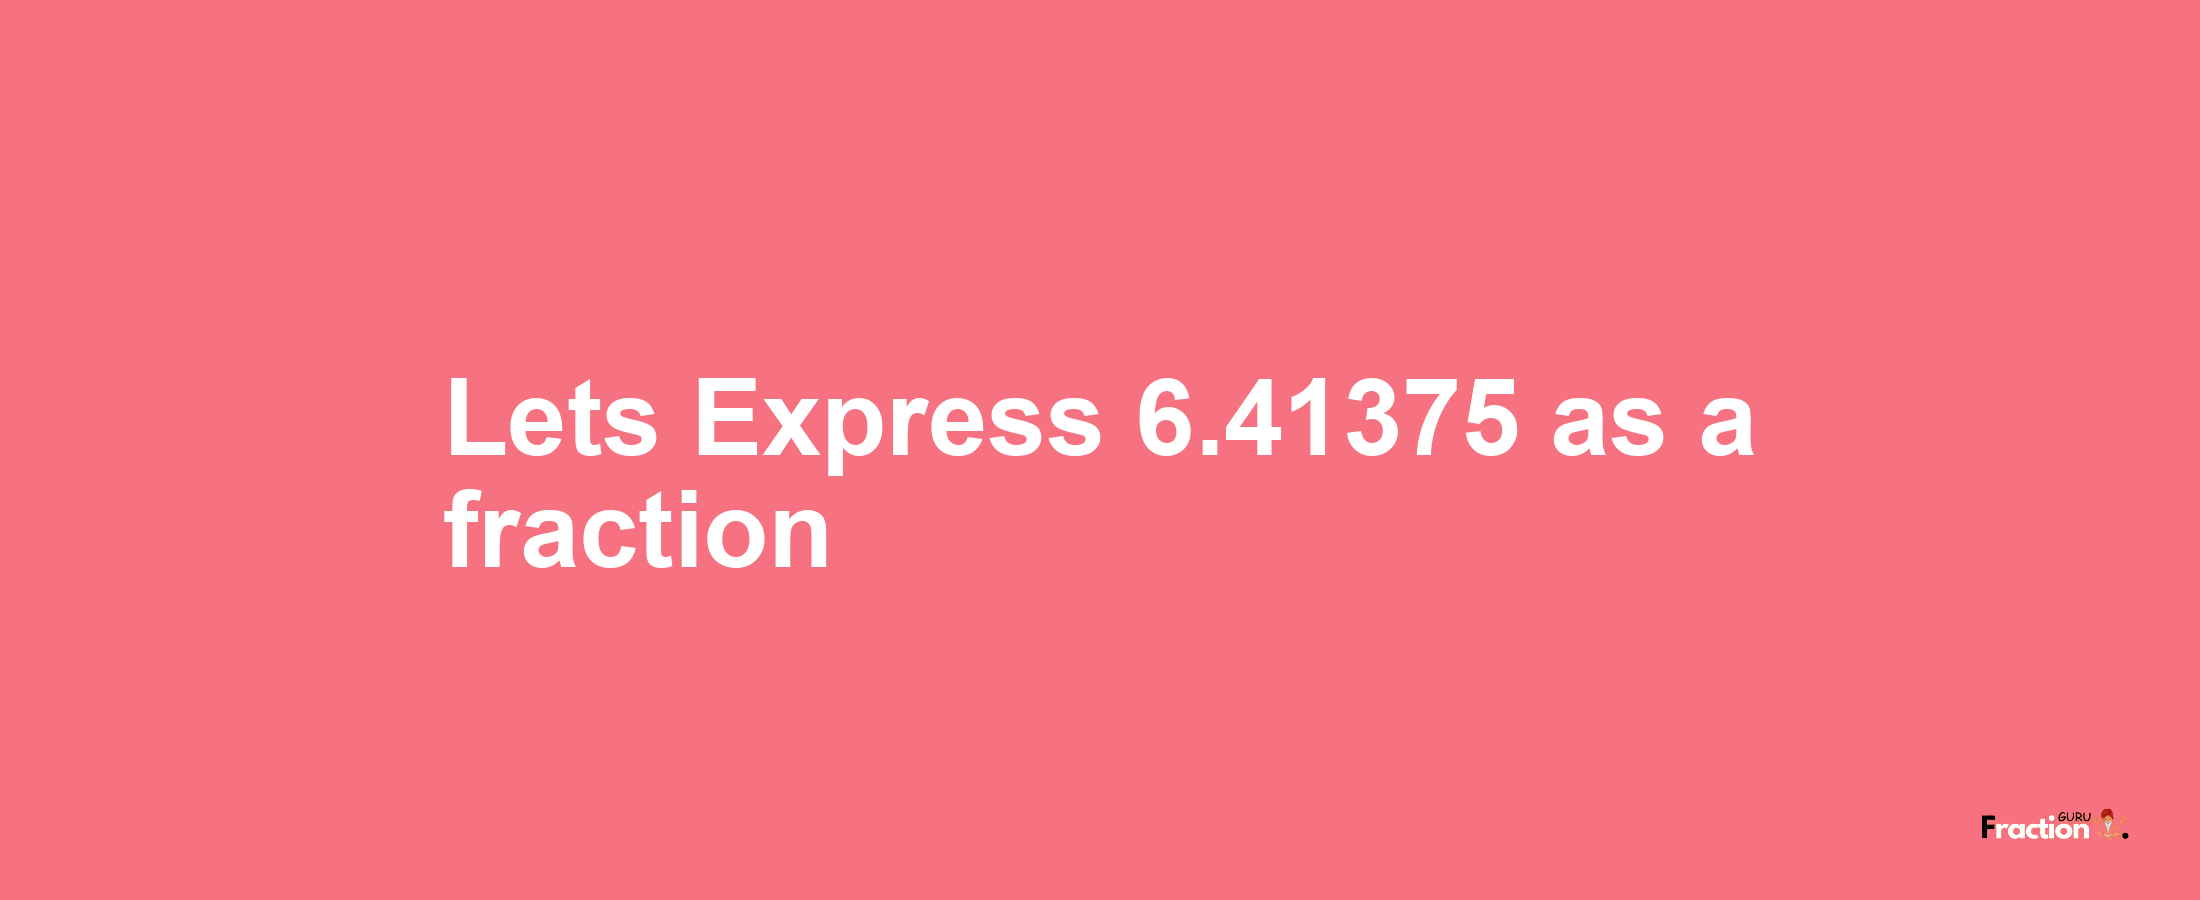 Lets Express 6.41375 as afraction